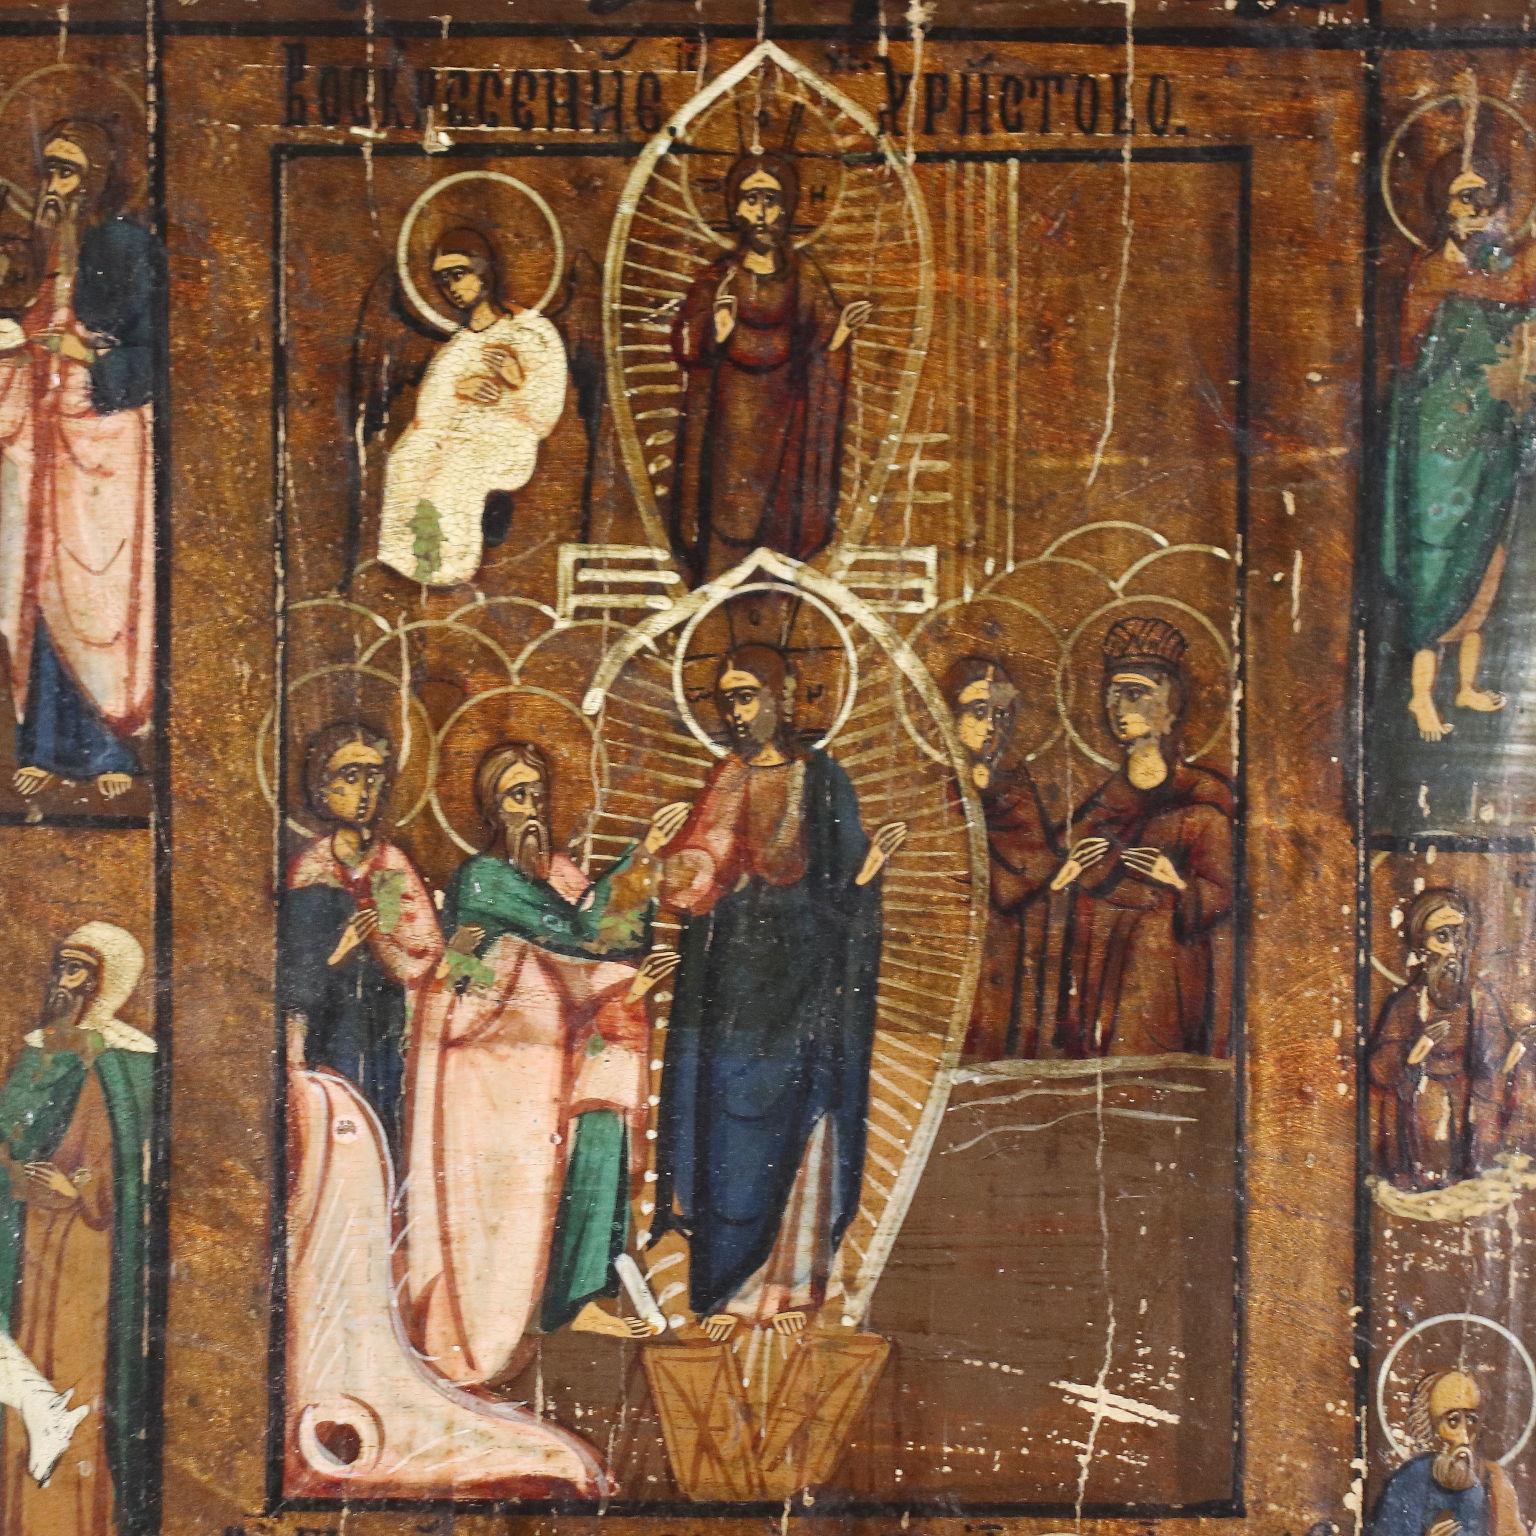 Tempera on wood. In the twelve panels that surround the central scene, which depicts the Resurrection and the Ascension of Christ, episodes from the life of Mary and Jesus are depicted. The scenes are accompanied by writing in Cyrillic. The table